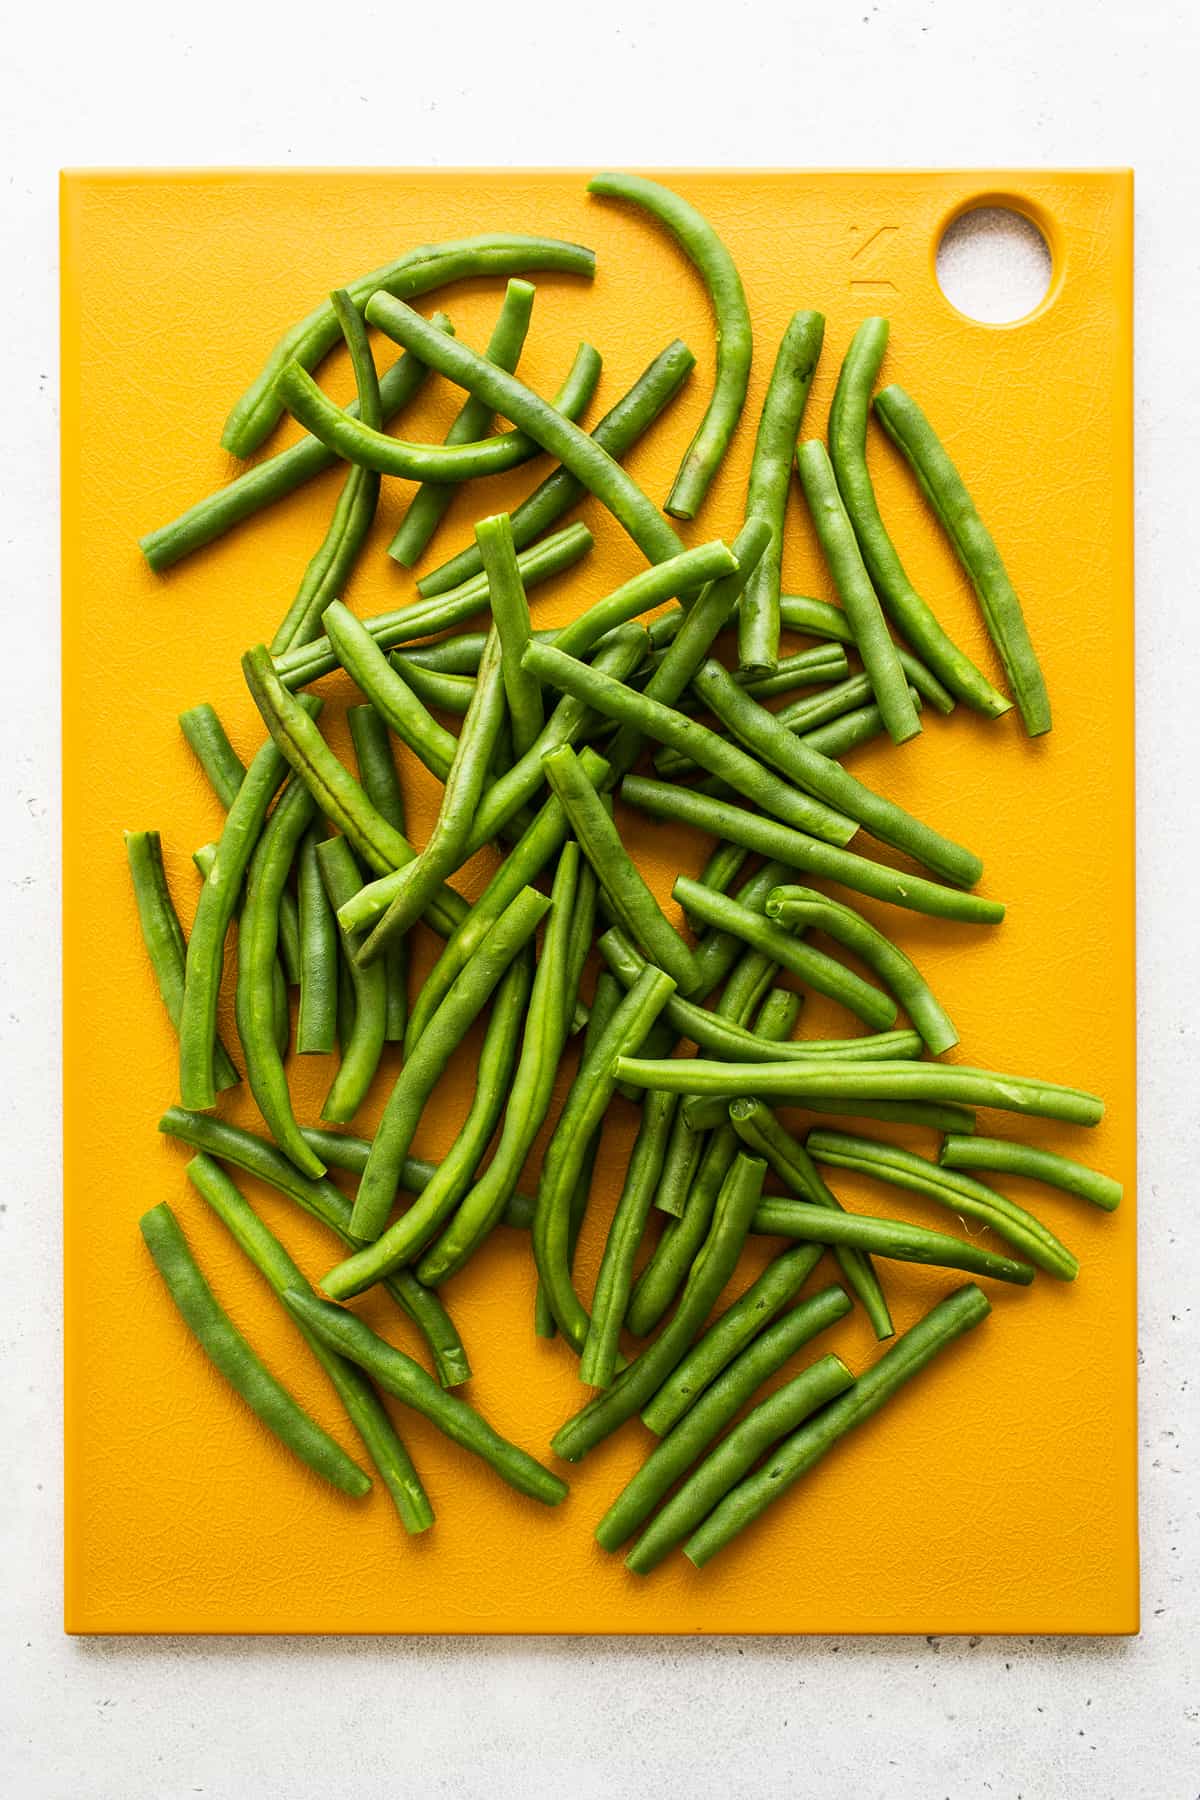 trimmed green beans on cutting board